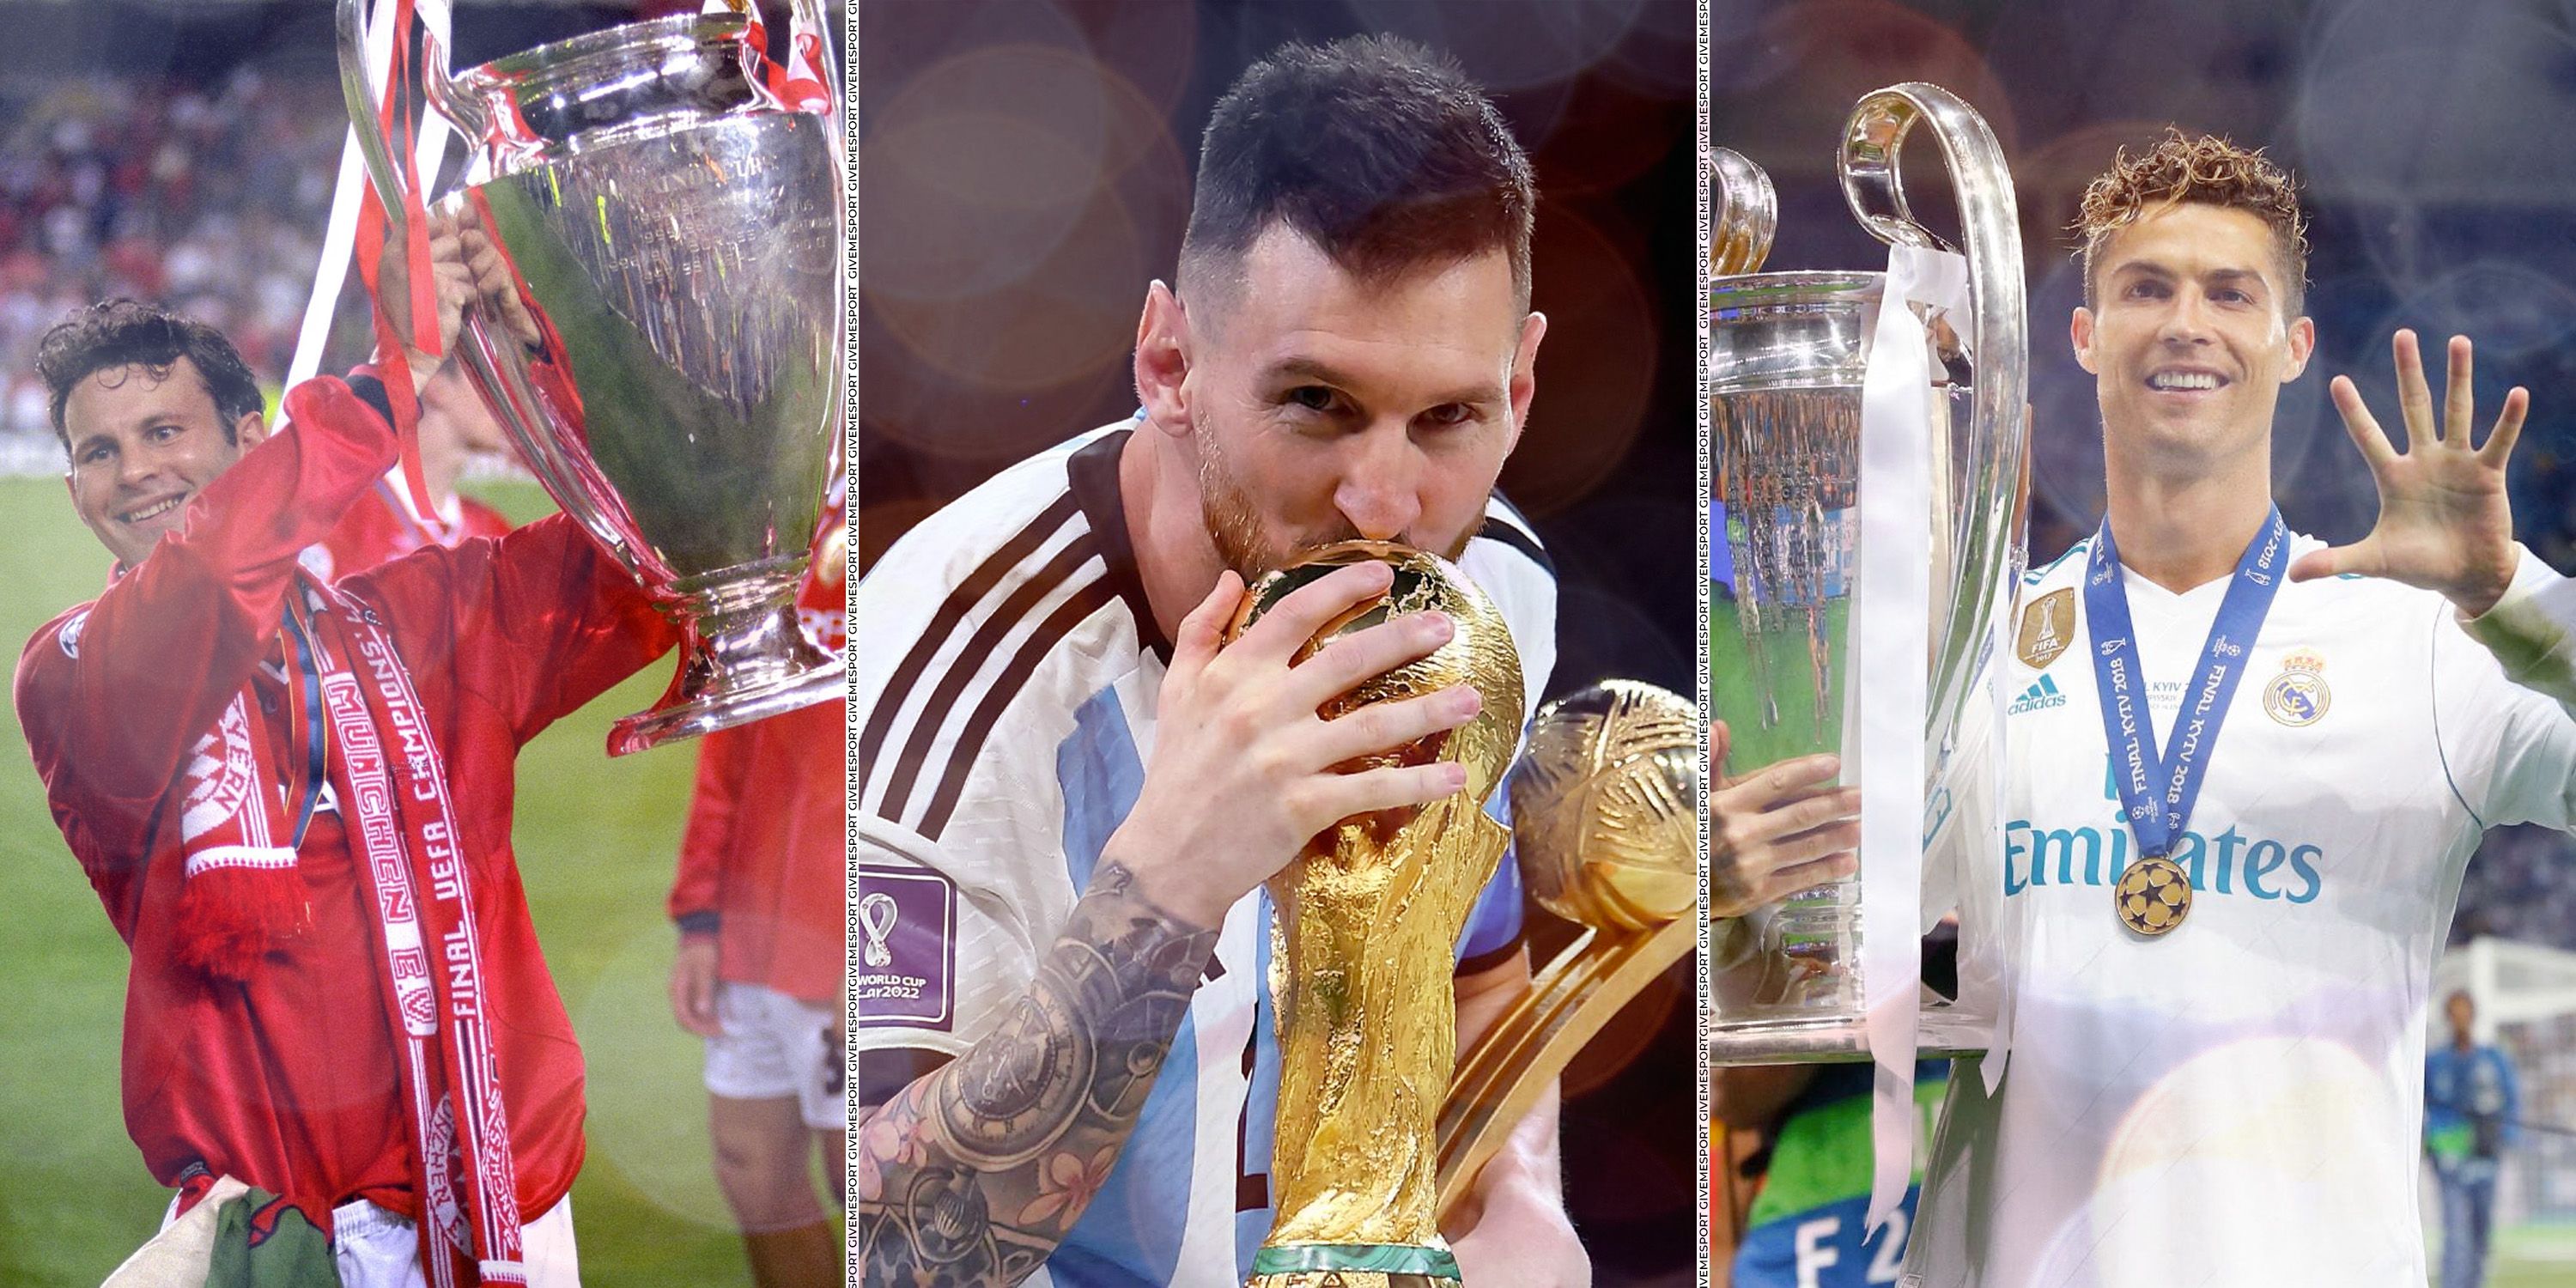 Ryan Giggs with the Champions League trophy, Lionel Messi with the World Cup trophy and Cristiano Ronaldo with the Champions League trophy